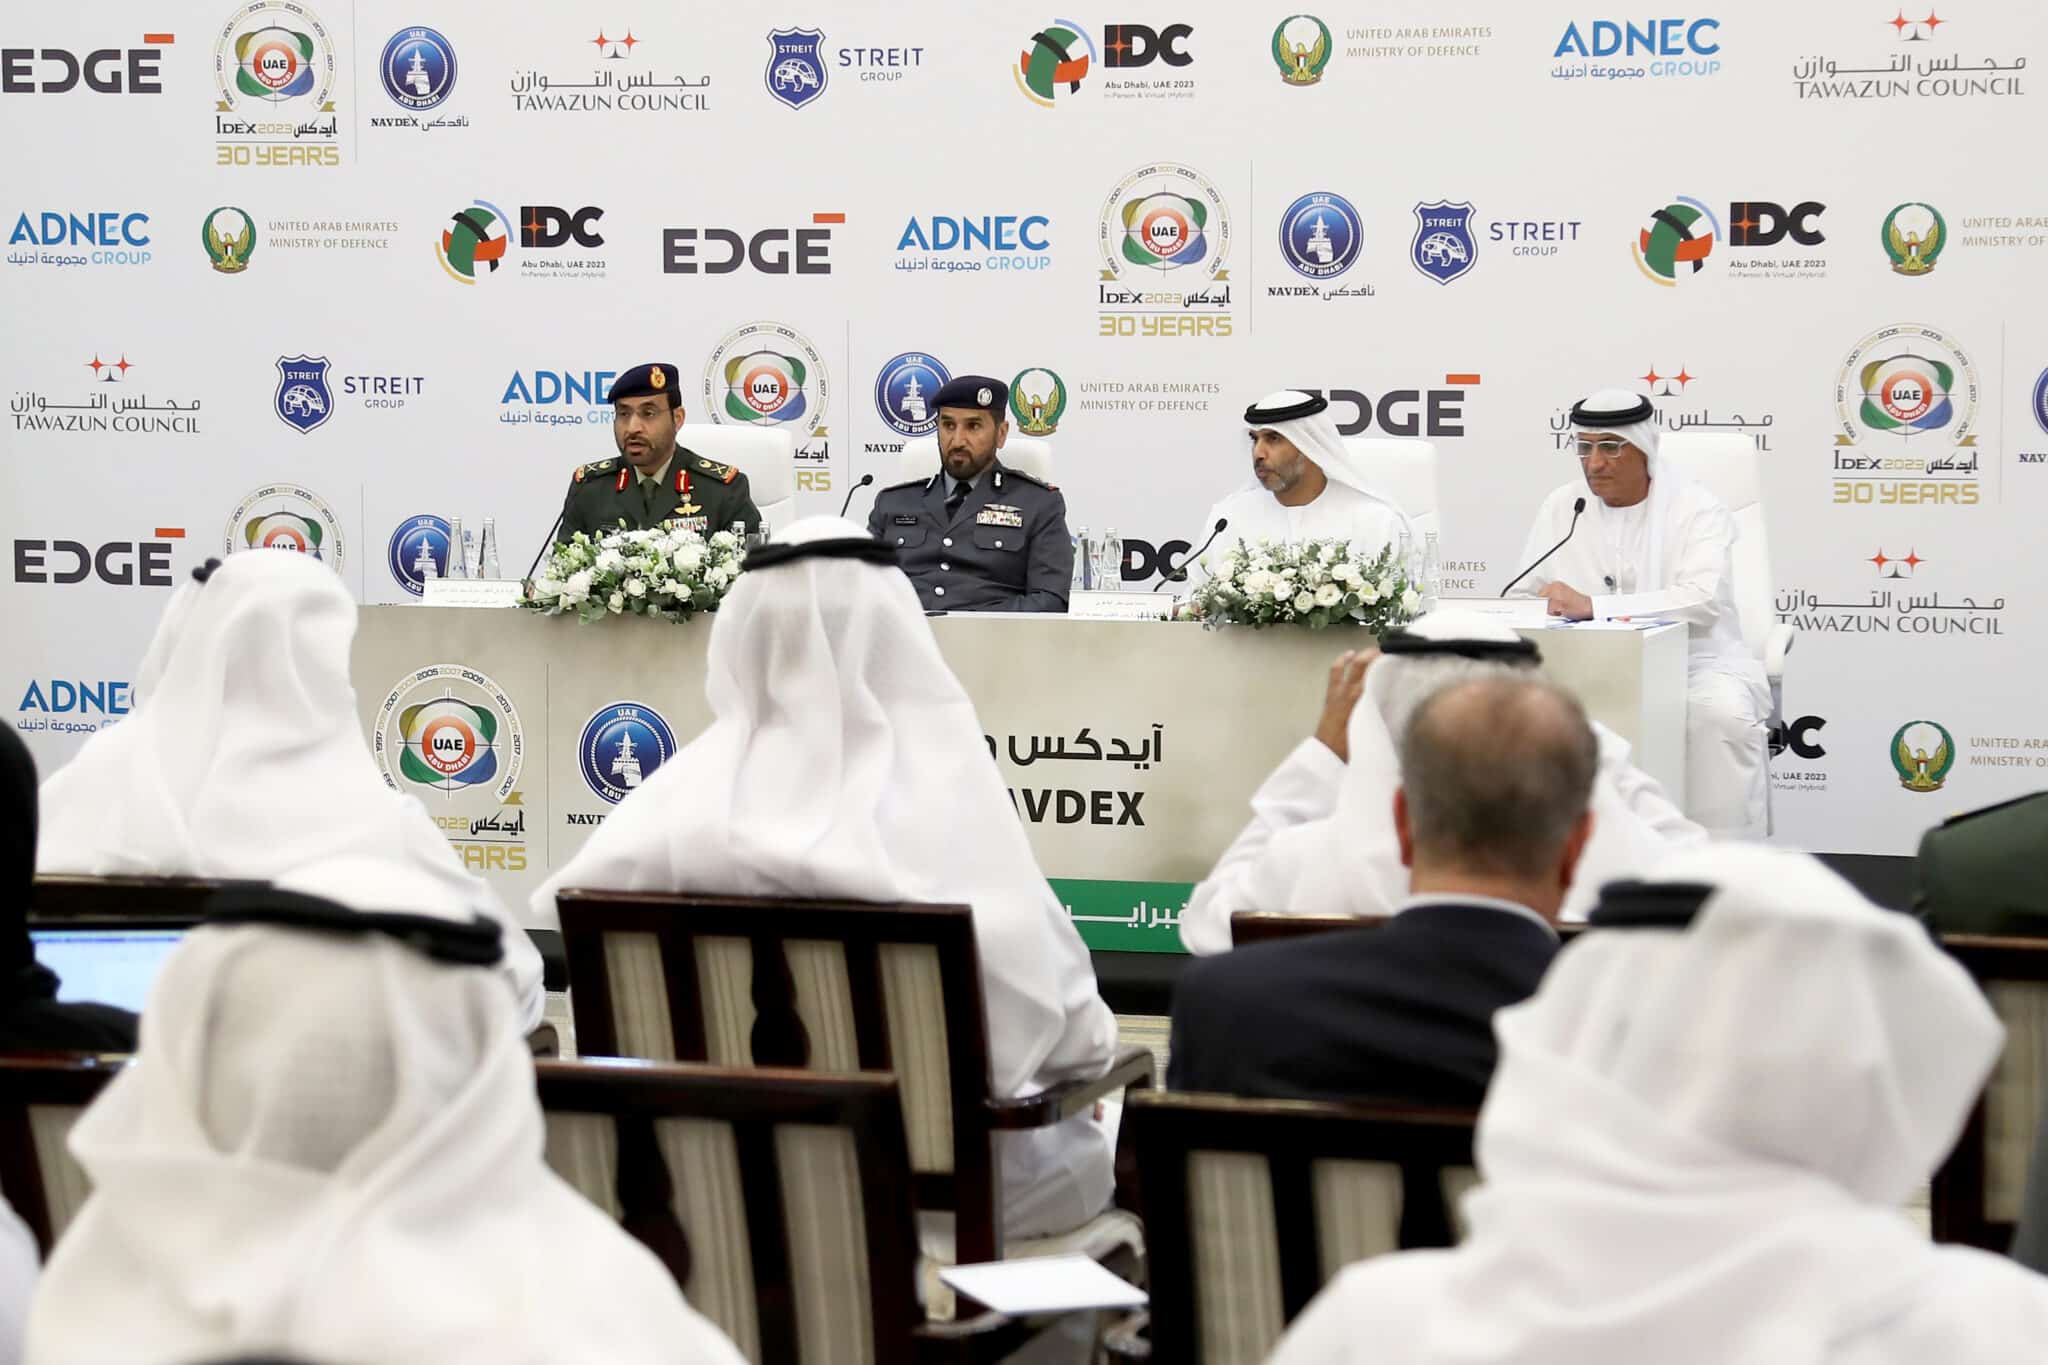 IDEX and NAVDEX to launch in Abu Dhabi with wide participation